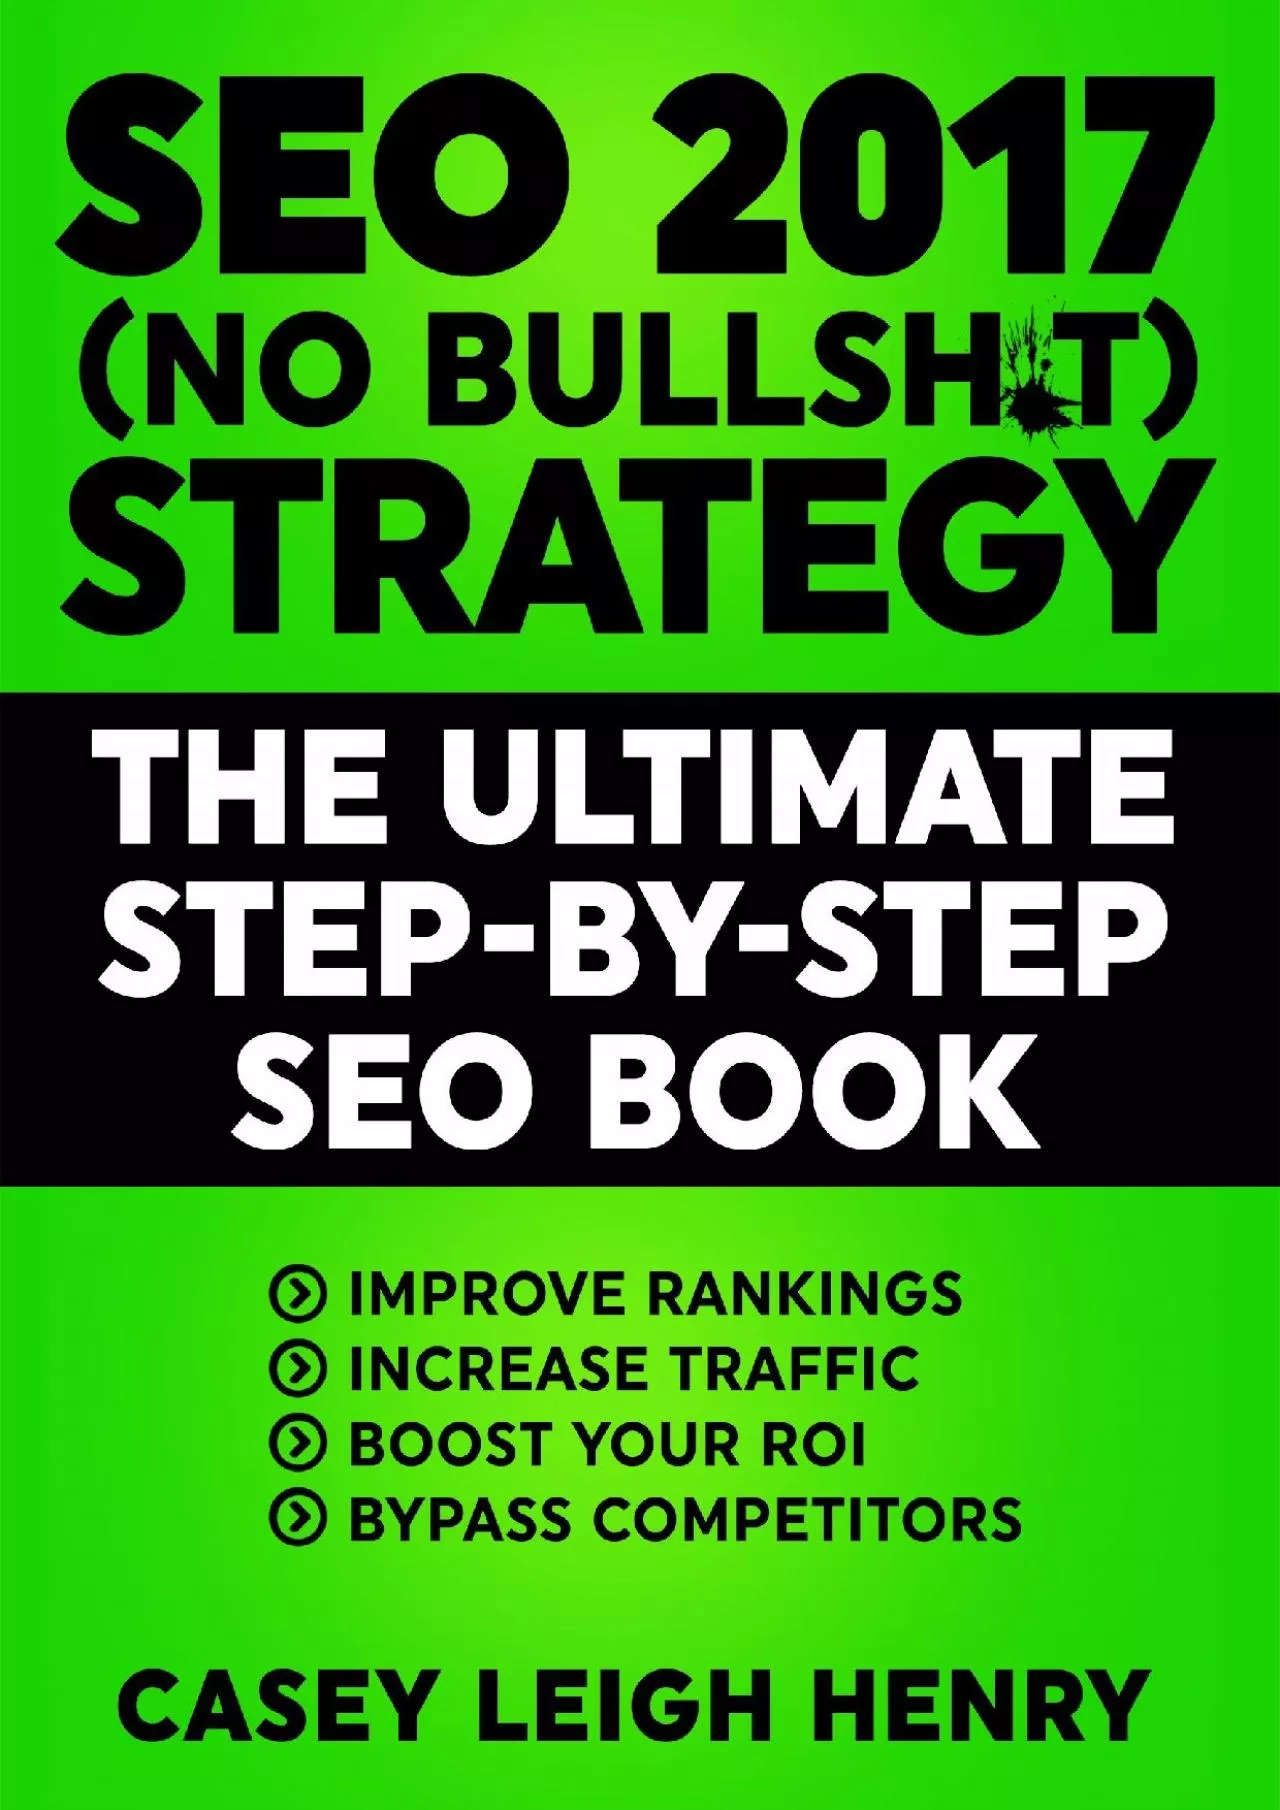 (BOOK)-SEO 2017 (No Bullsh*t) Strategy The Ultimate Step-by-Step Search Engine Optimization